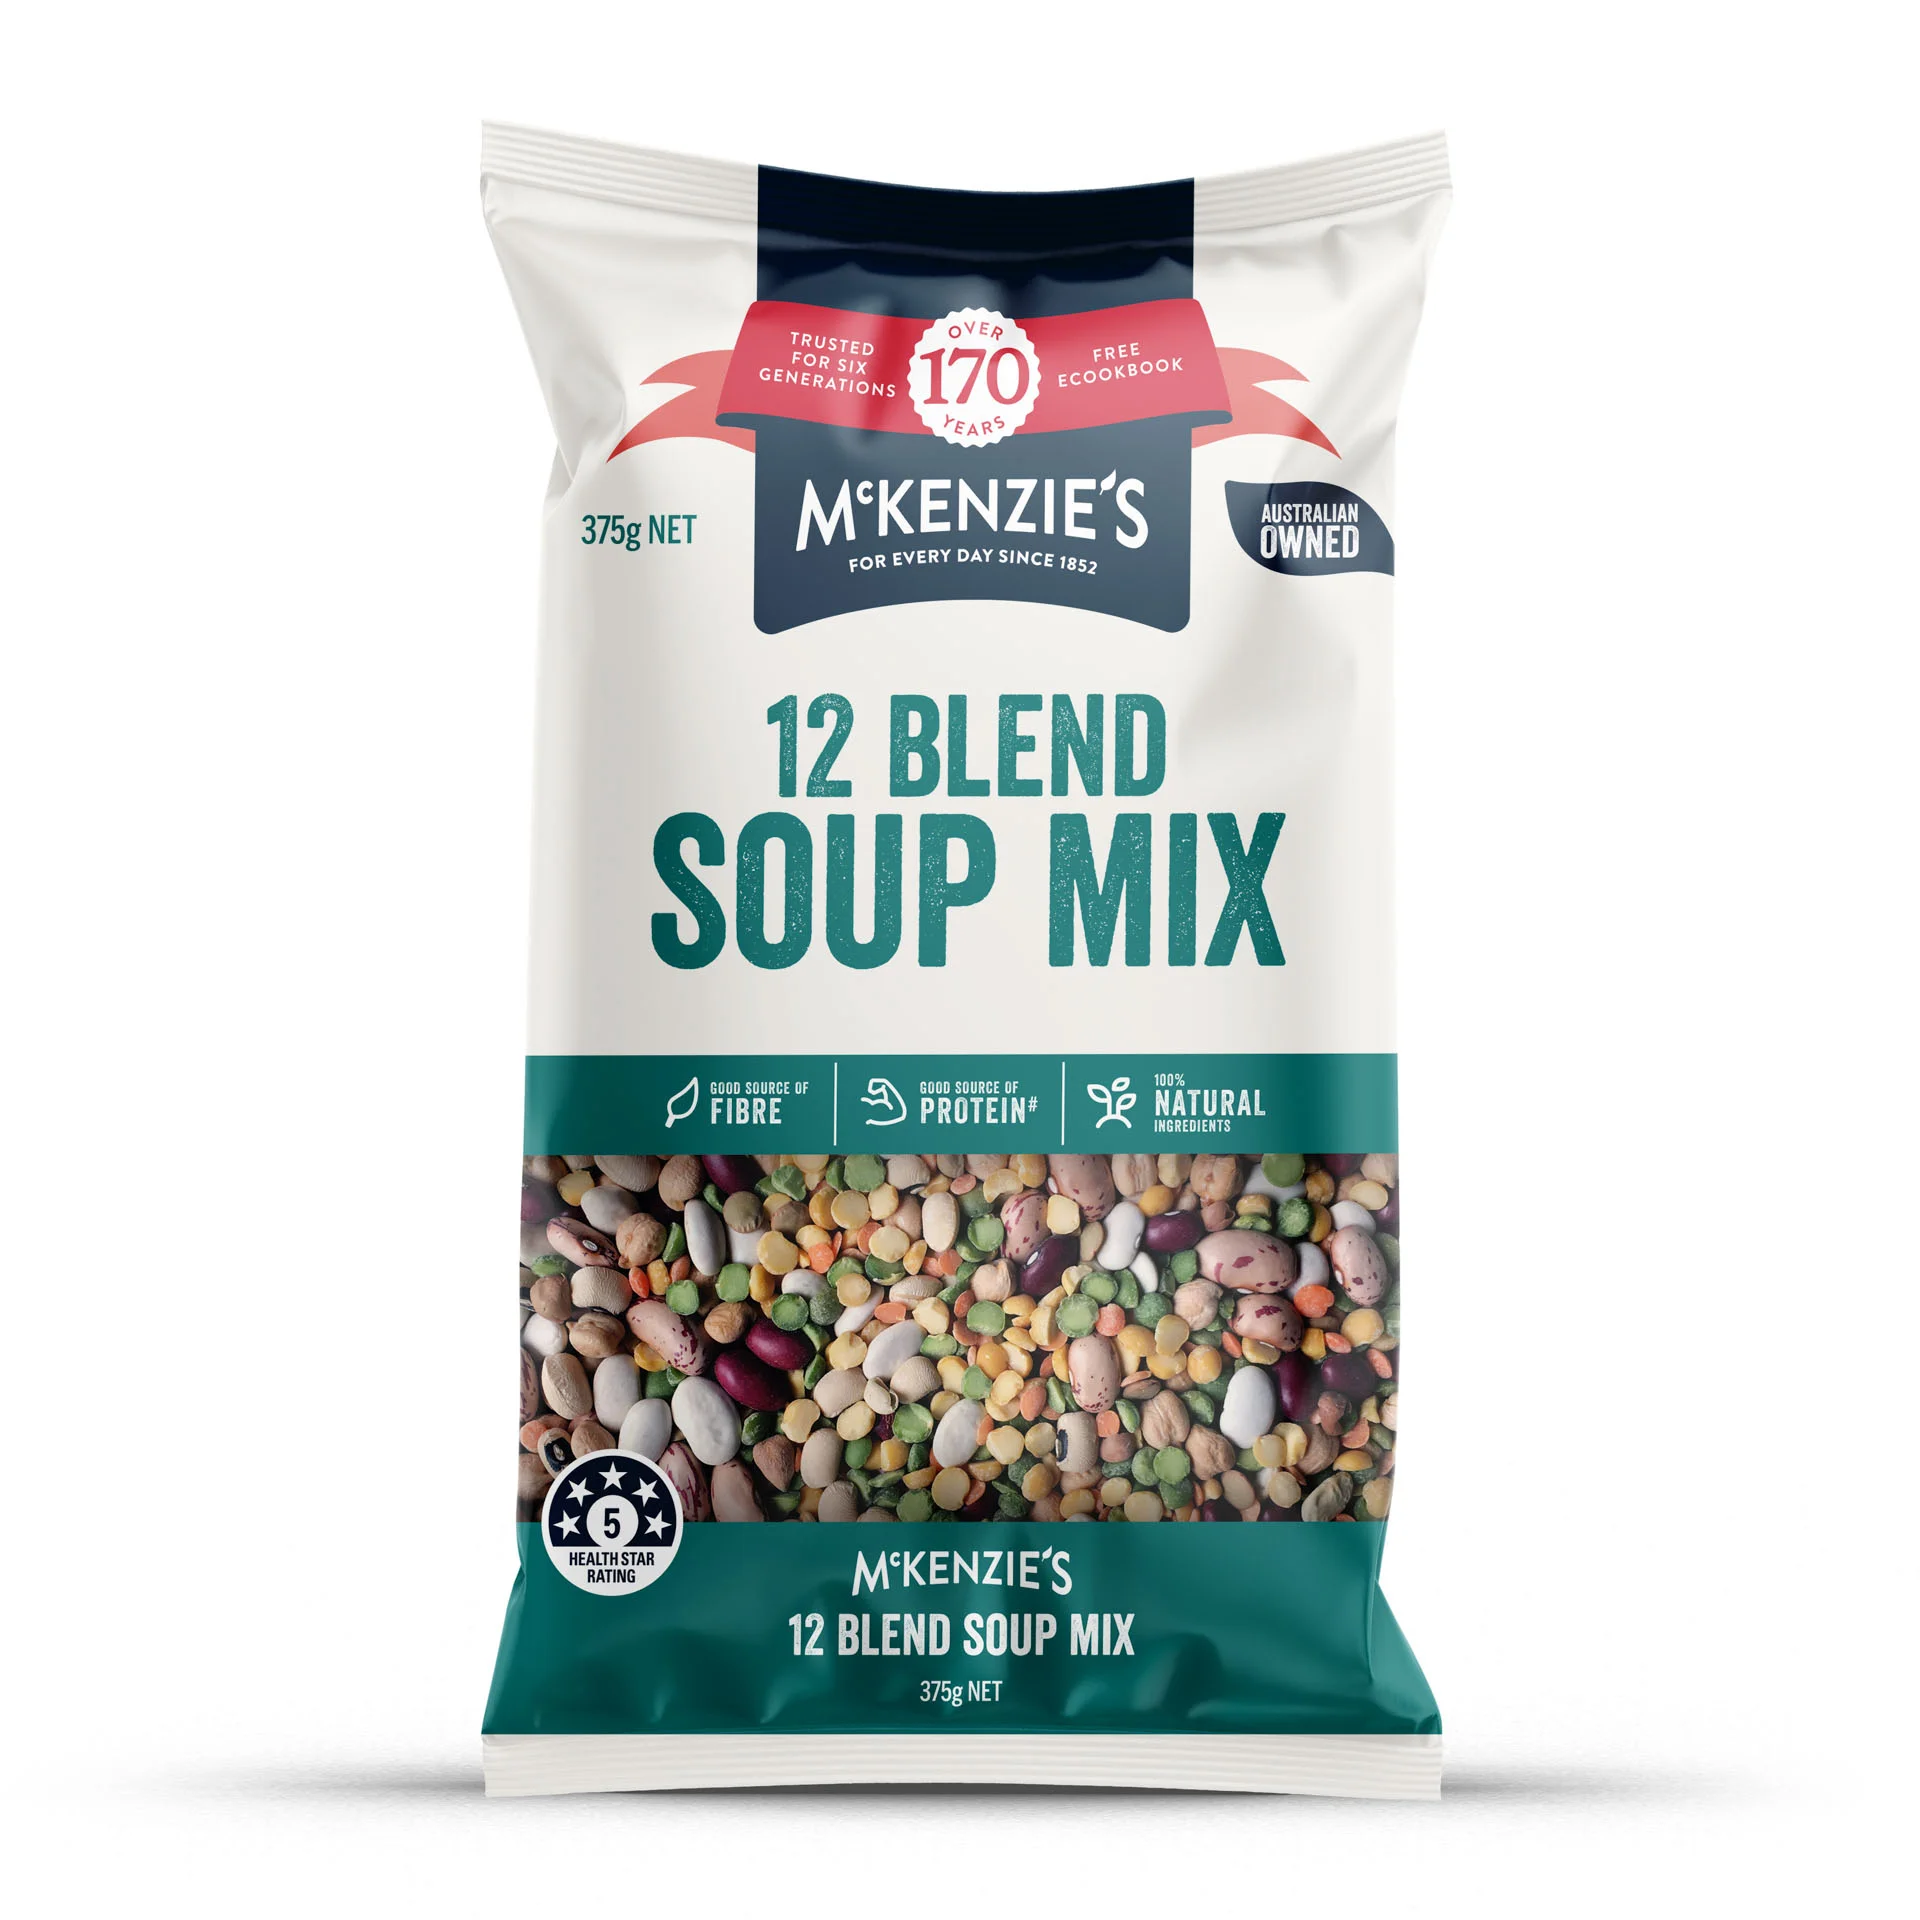 Product photo of McKenzie's 12 Blend Soup Mix